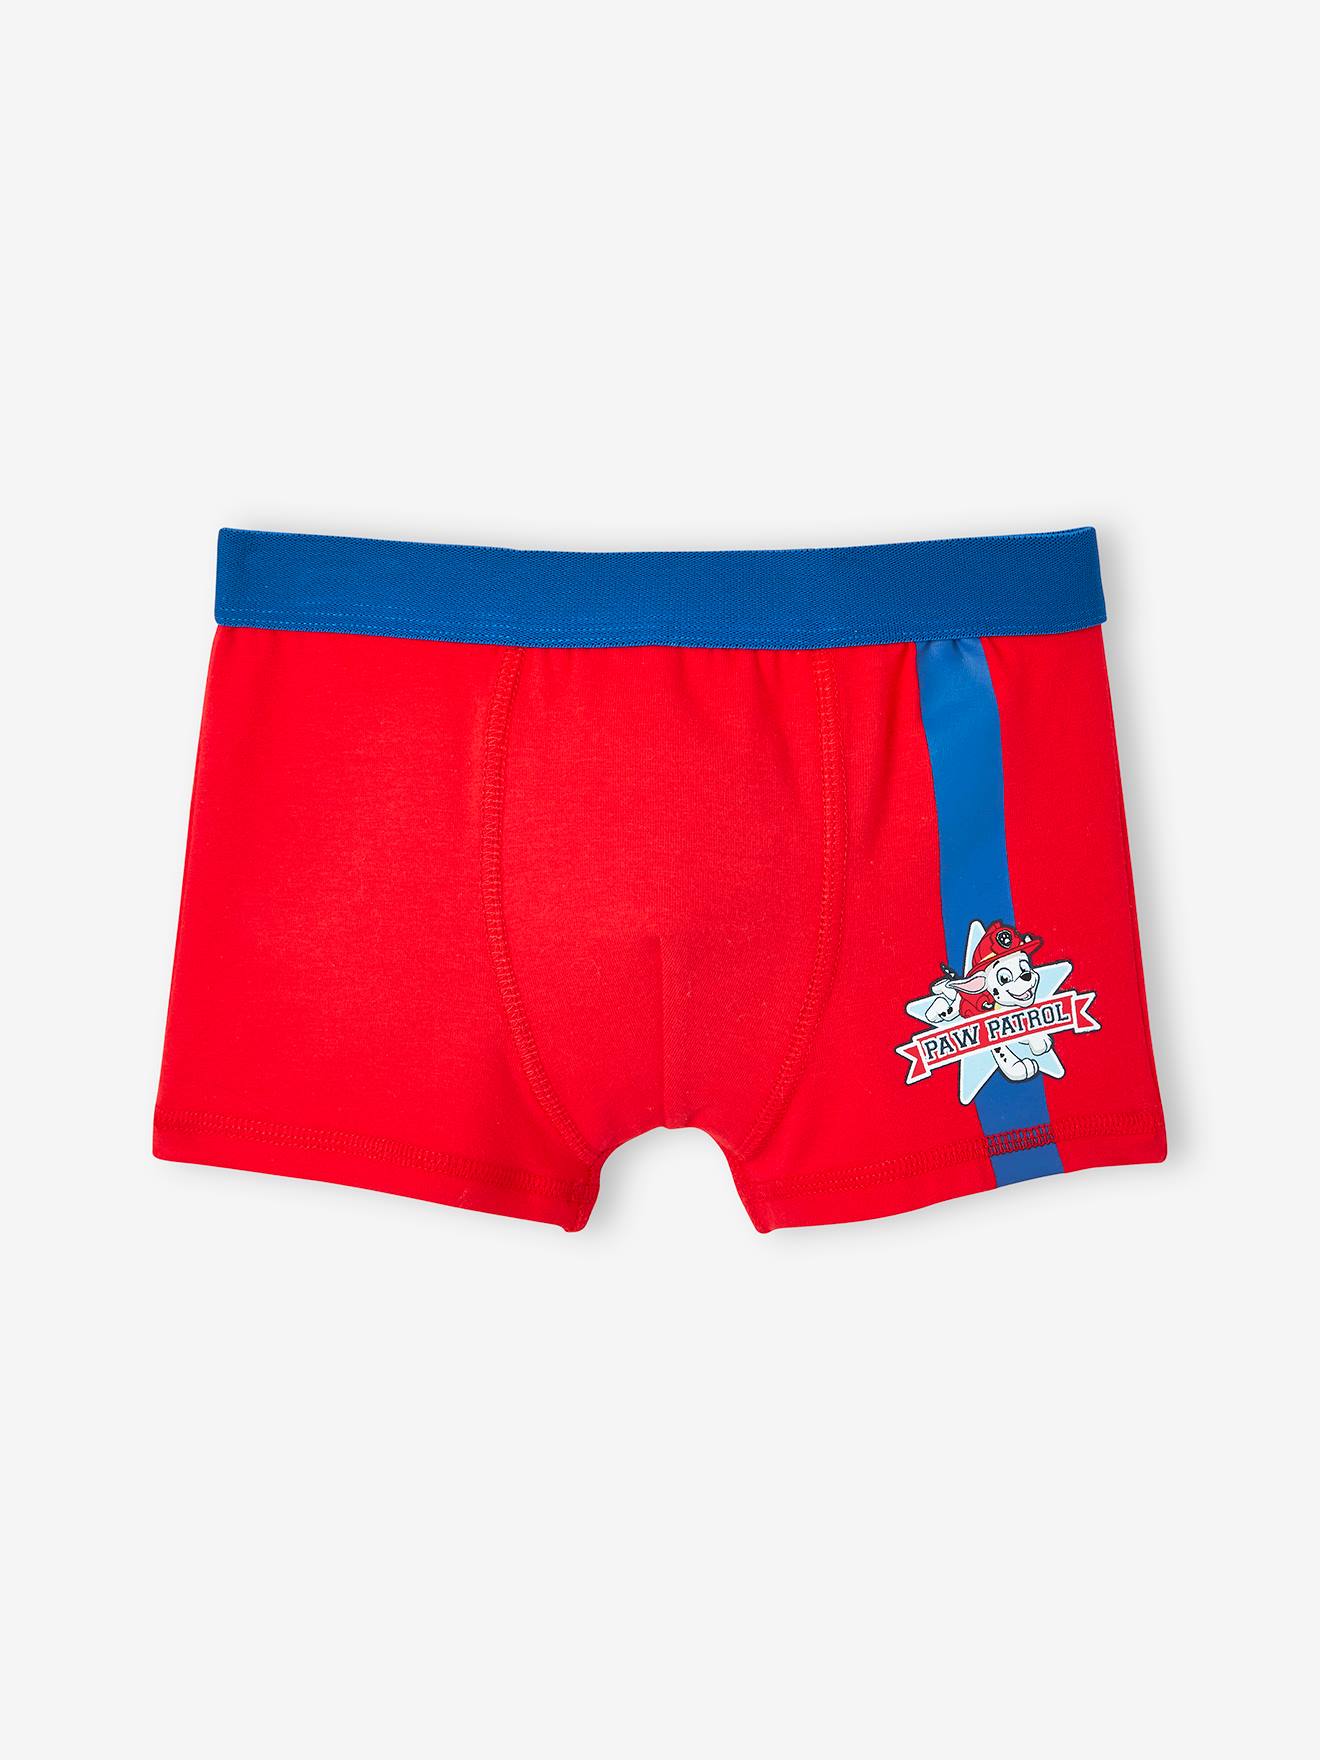 PAW Patrol boxers 3 pack COLOUR navy - RESERVED - 8347L-59X